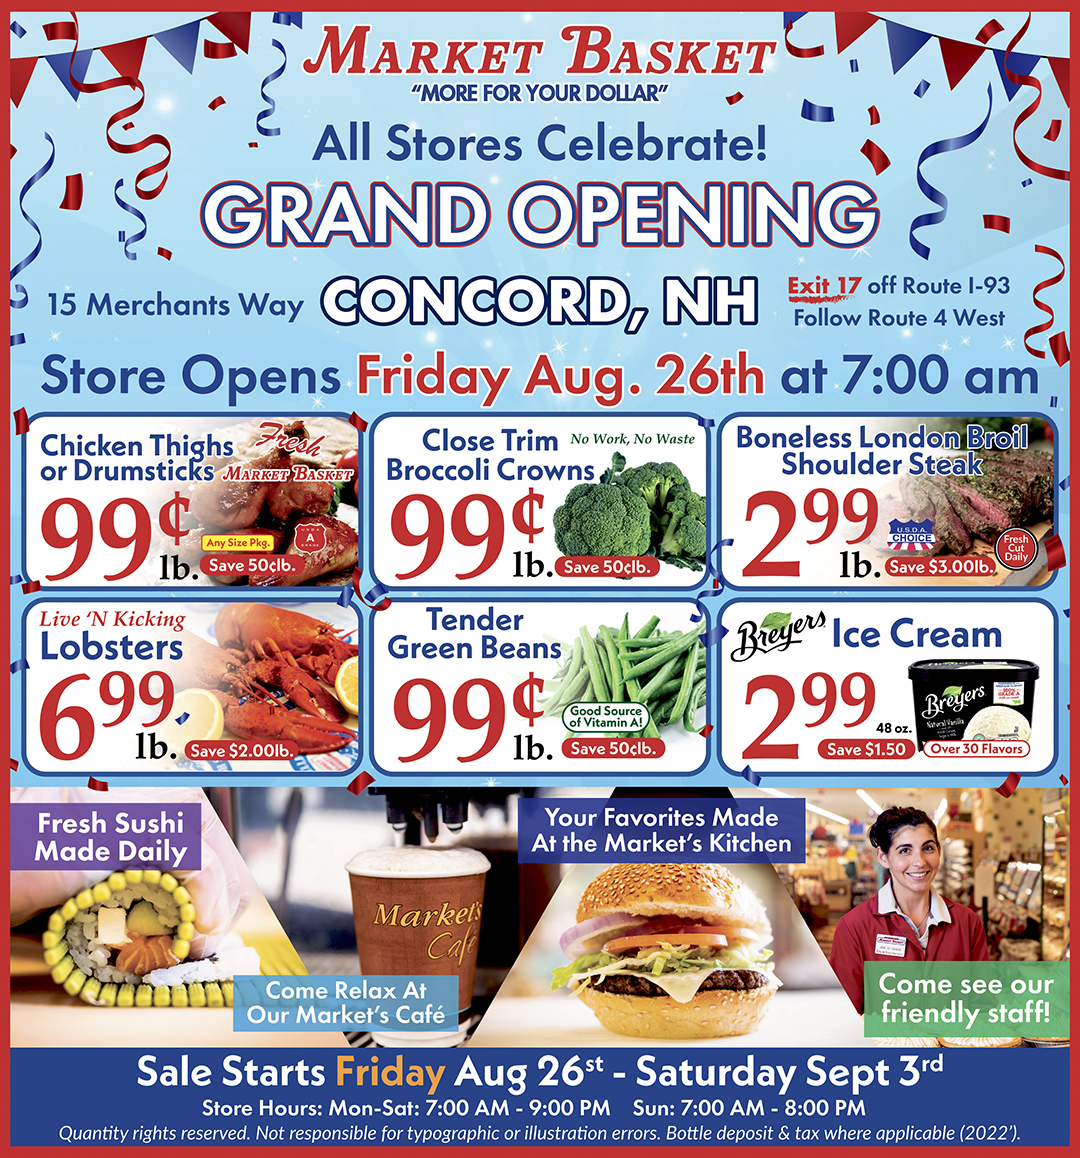 Grand Opening Day @ the Newest Market Basket Store Location in Concord